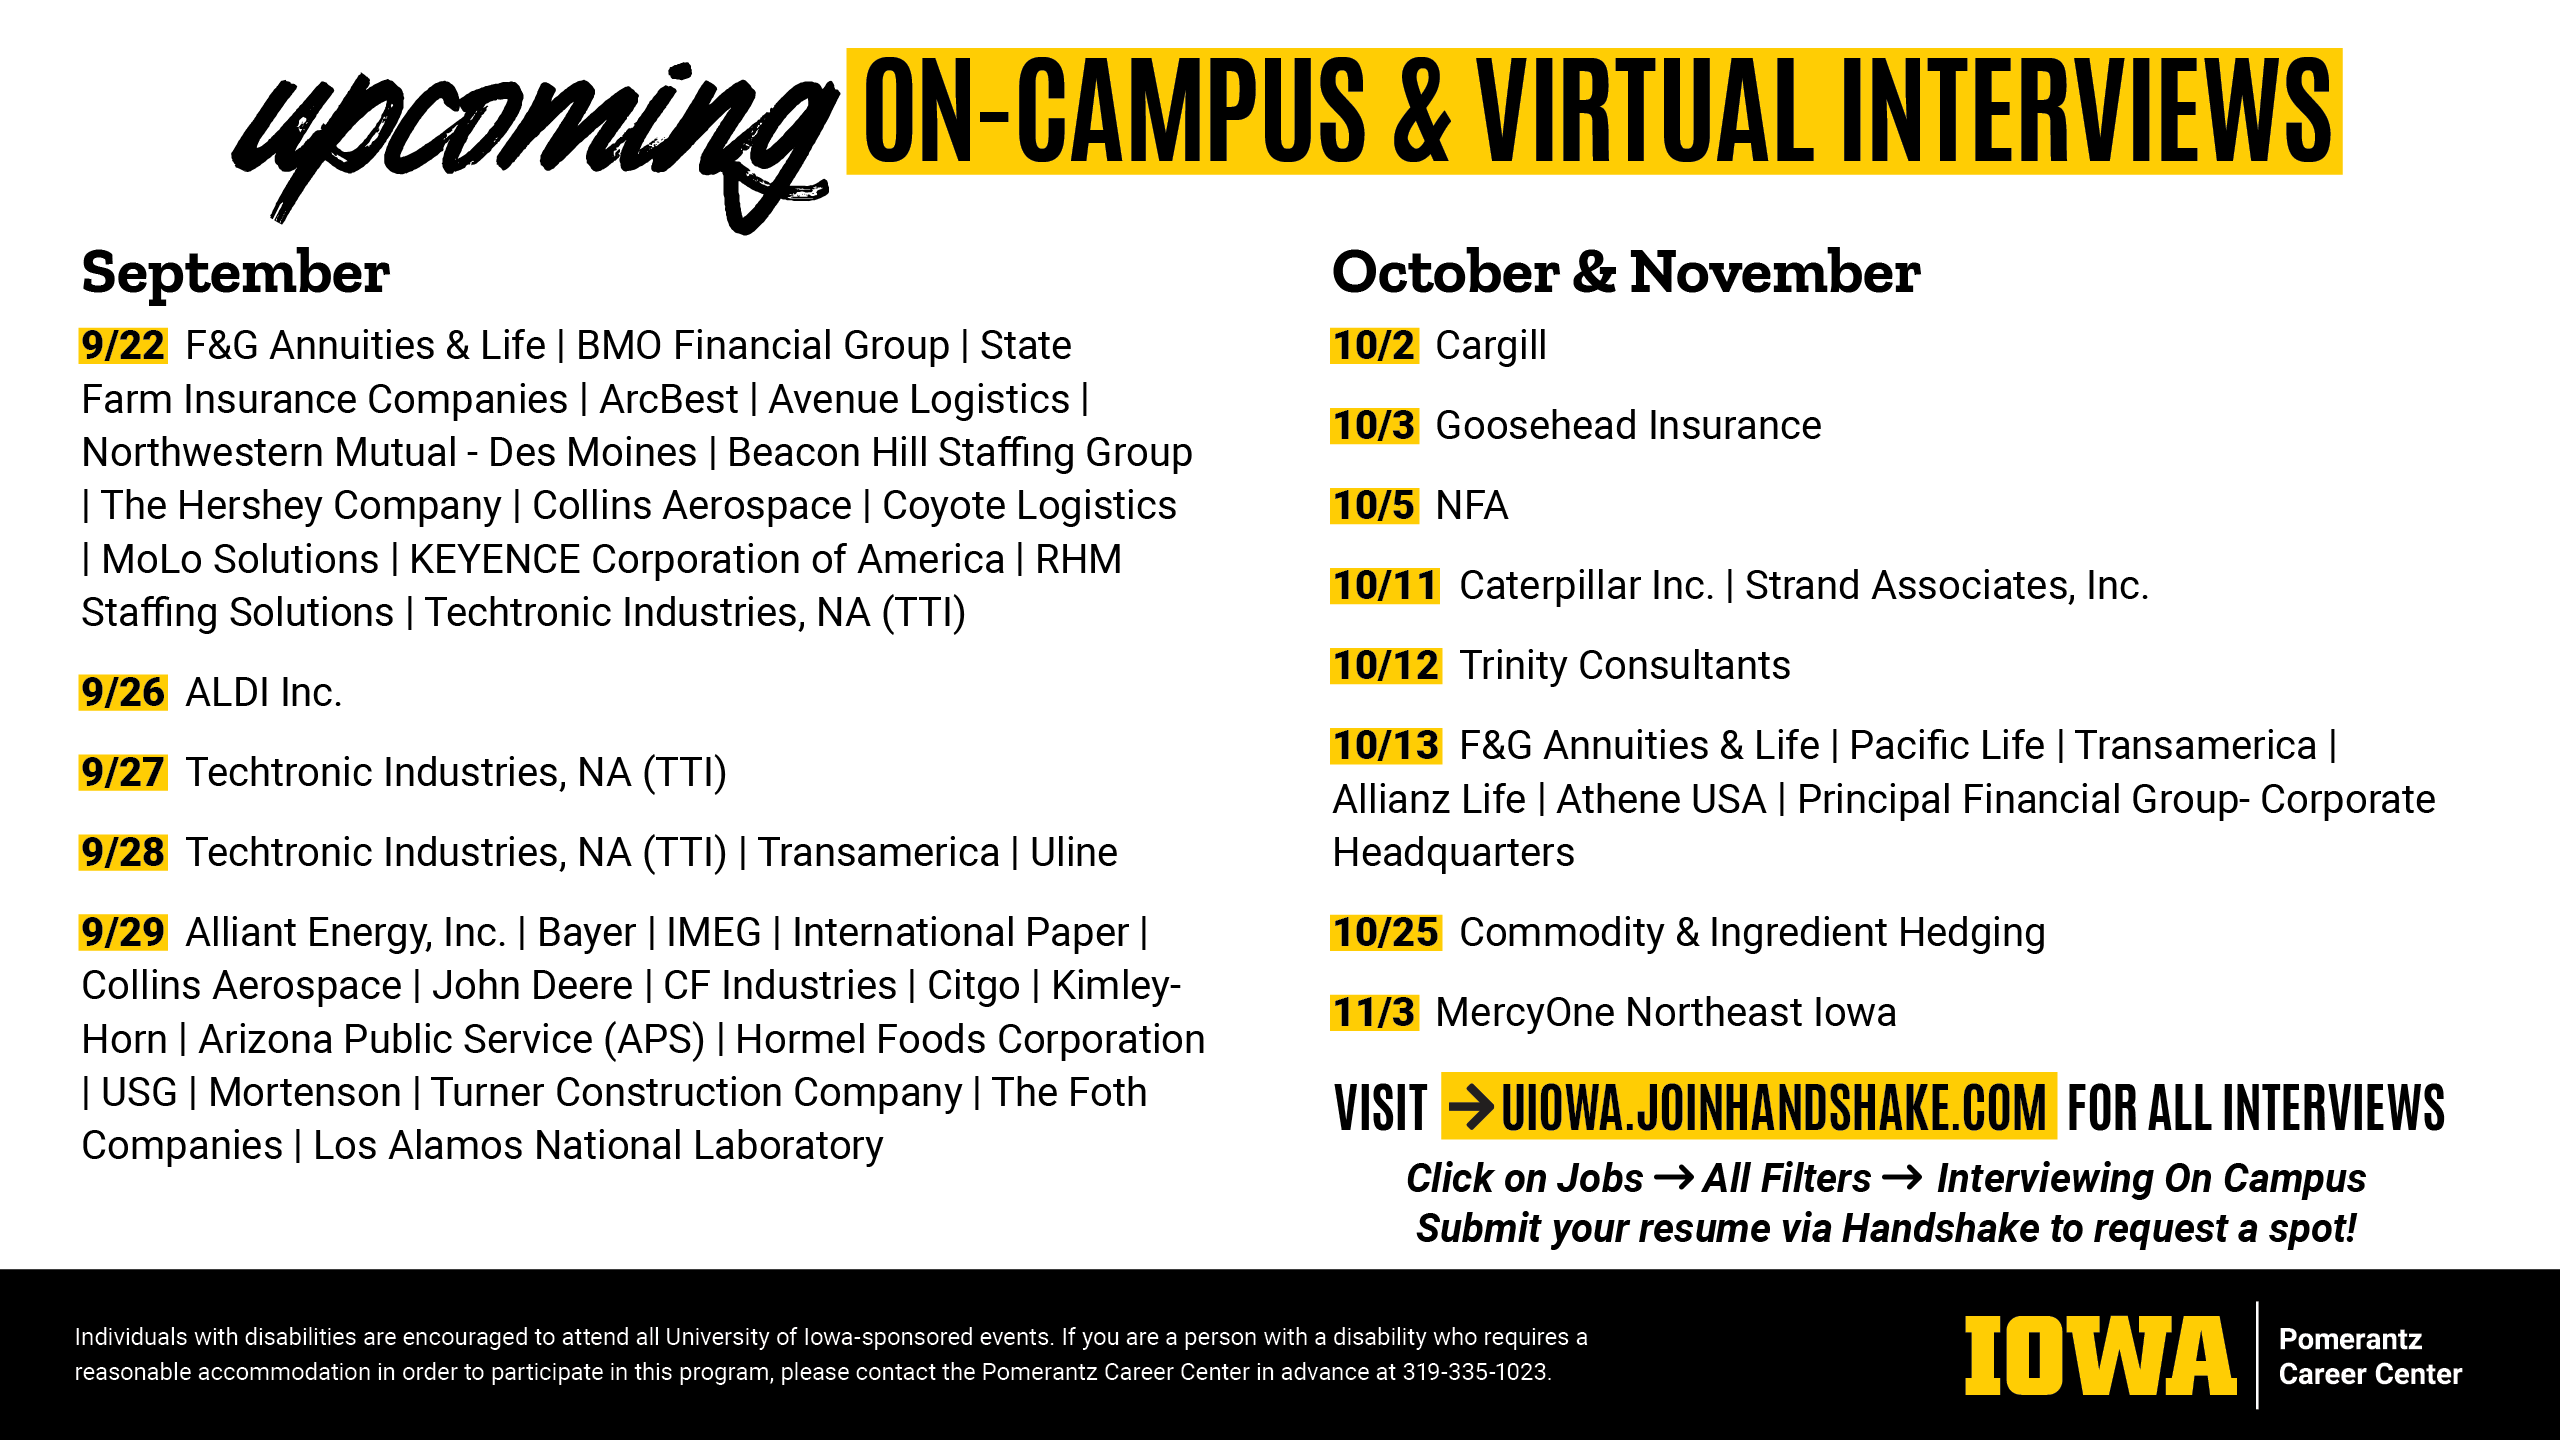 View all upcoming on-campus & virtual interviews at uiowa.joinhandshake.com